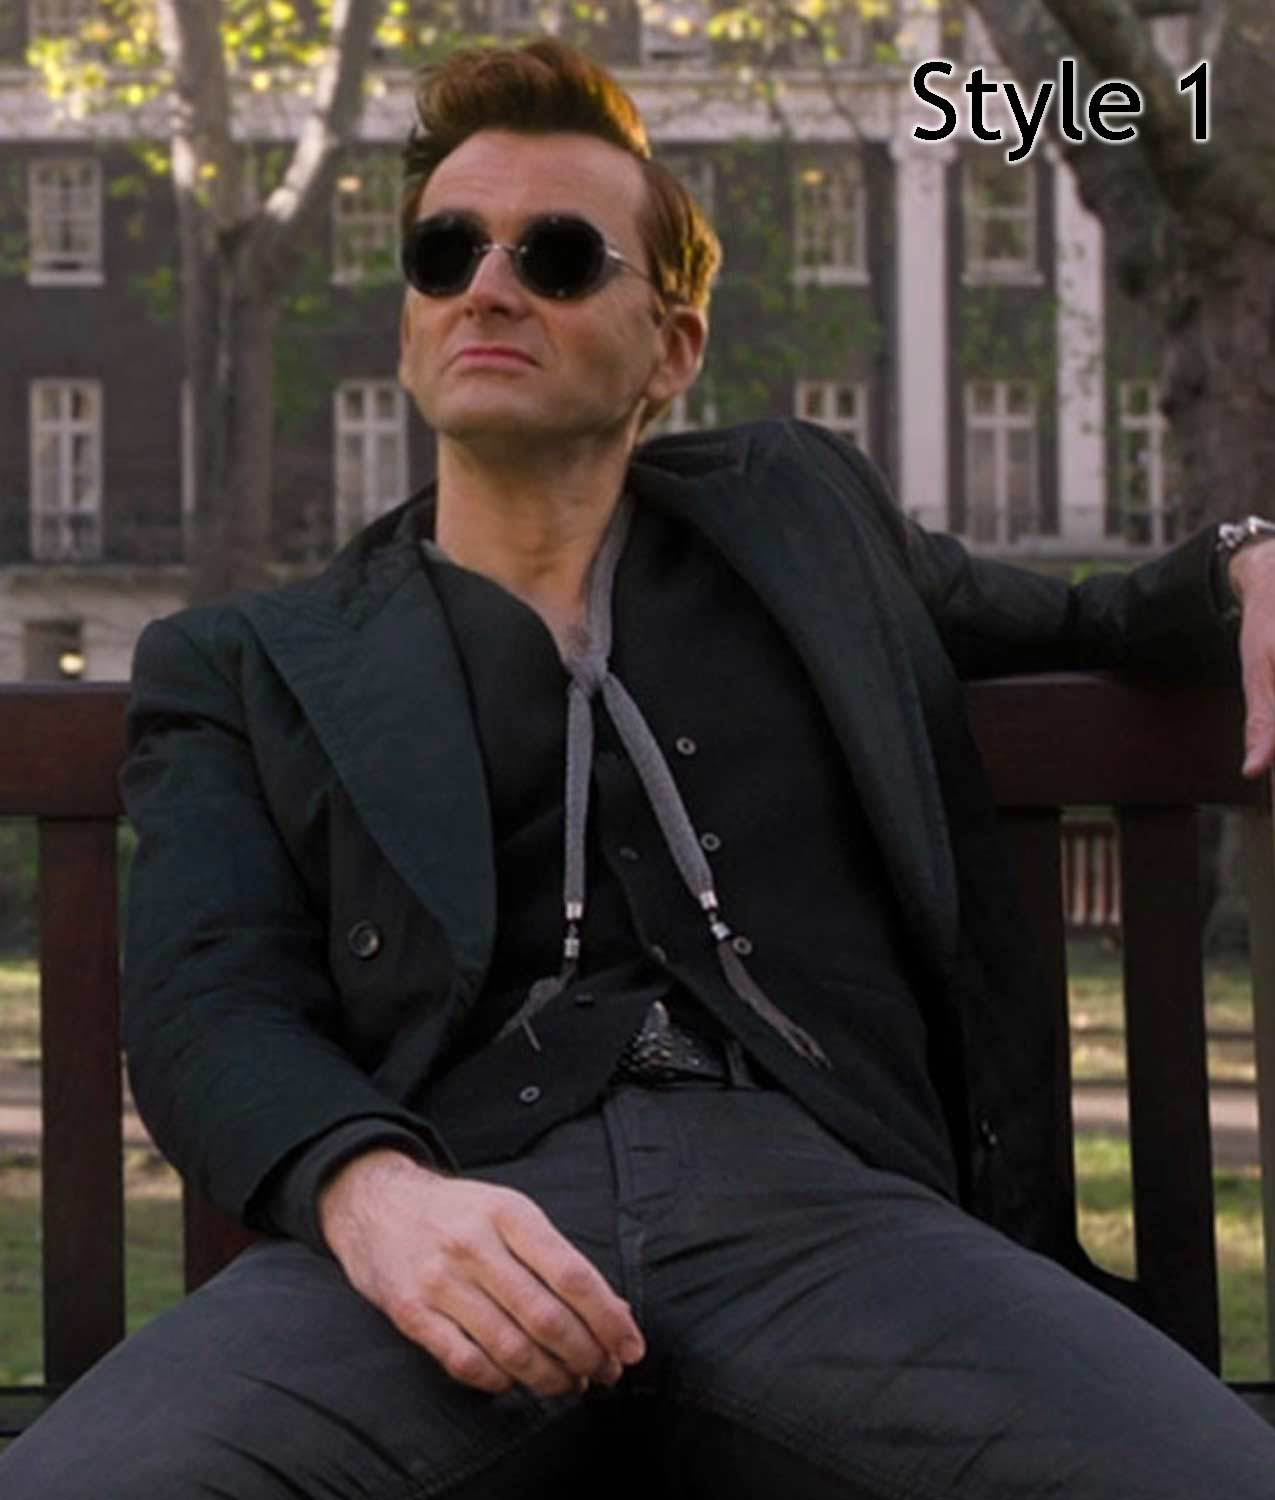 Crowley from Good Omens | RPF Costume and Prop Maker Community